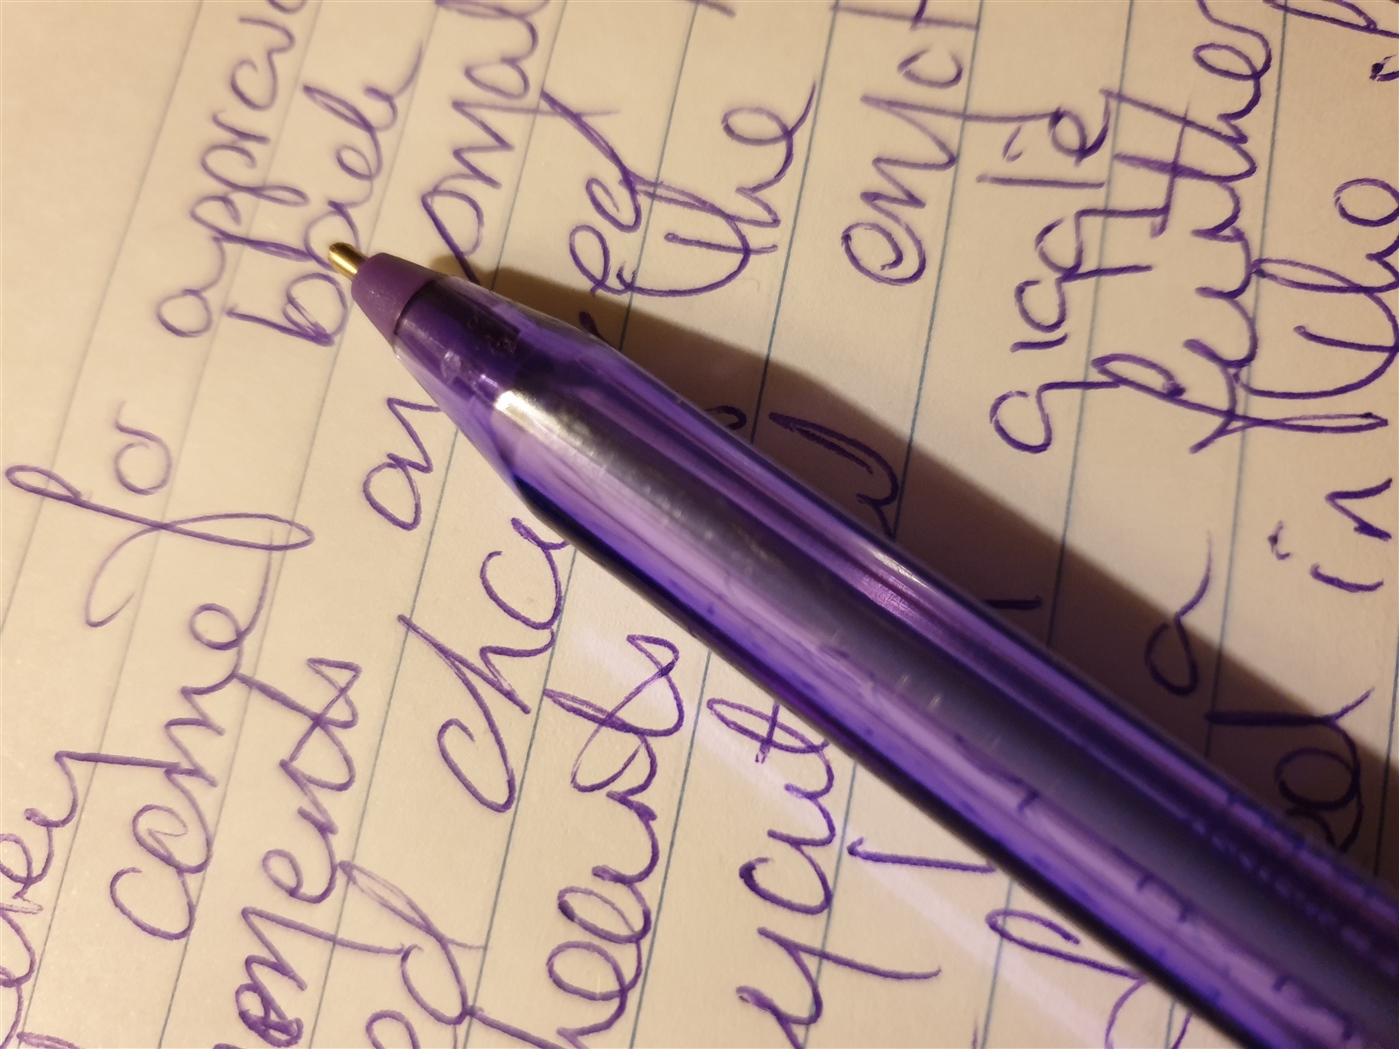 A blue pen resting on a lined notepad page, with lots of handwritten notes.